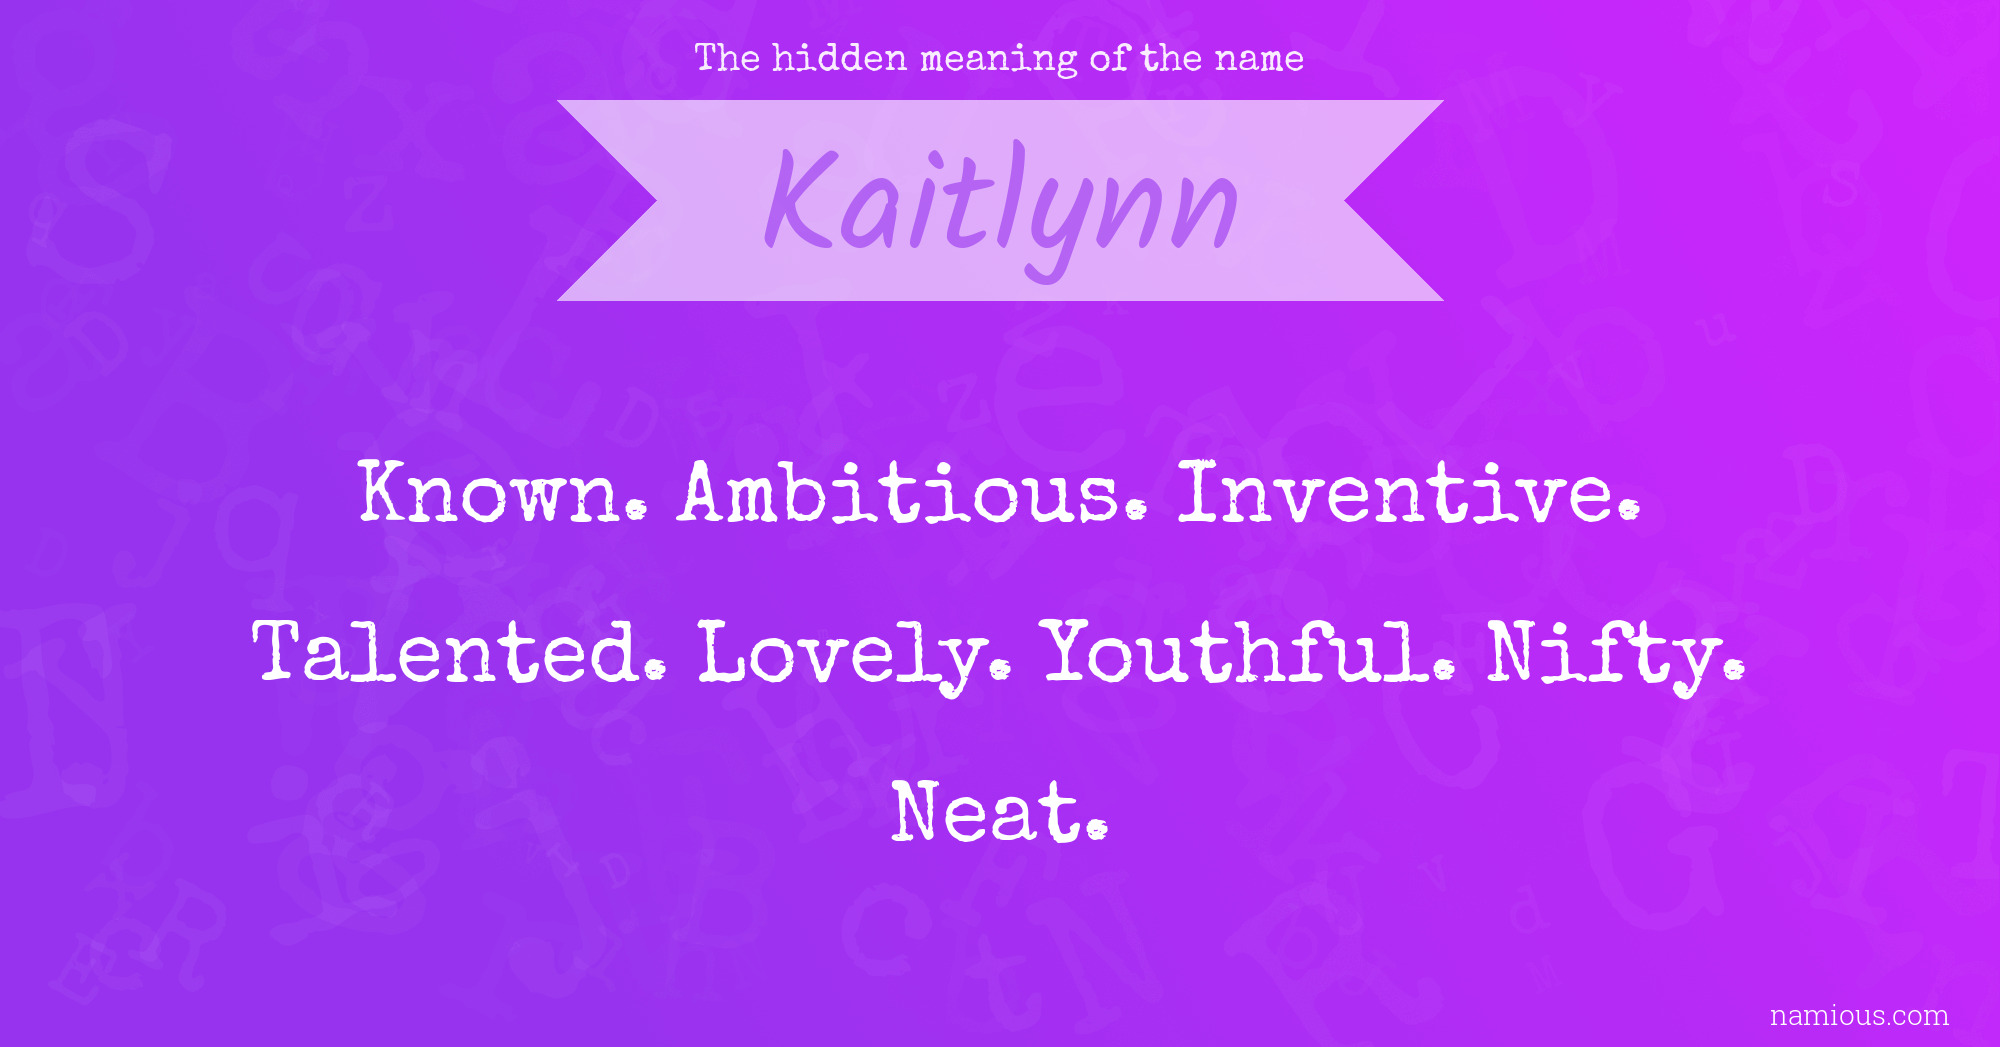 The hidden meaning of the name Kaitlynn